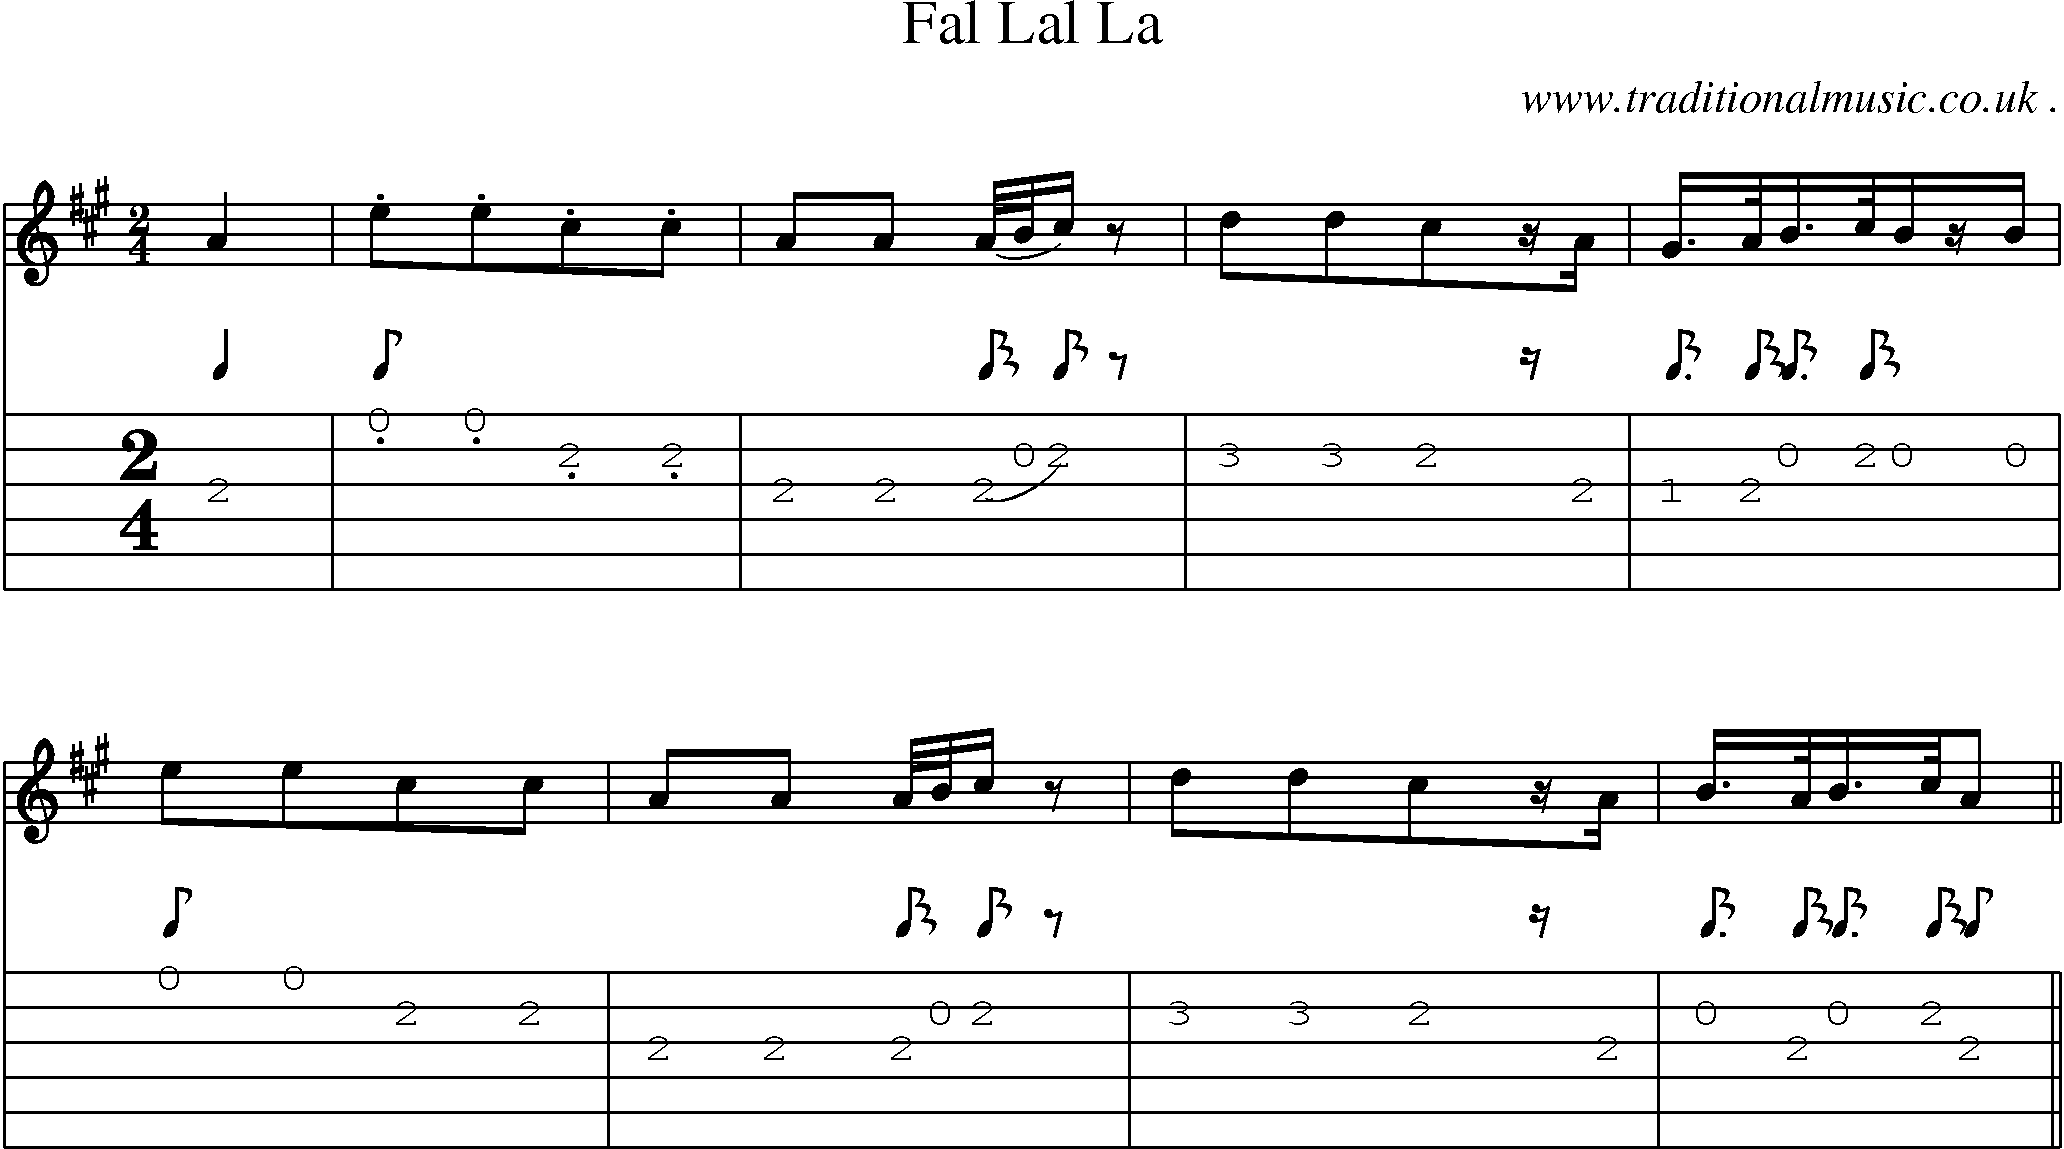 Sheet-Music and Guitar Tabs for Fal Lal La 